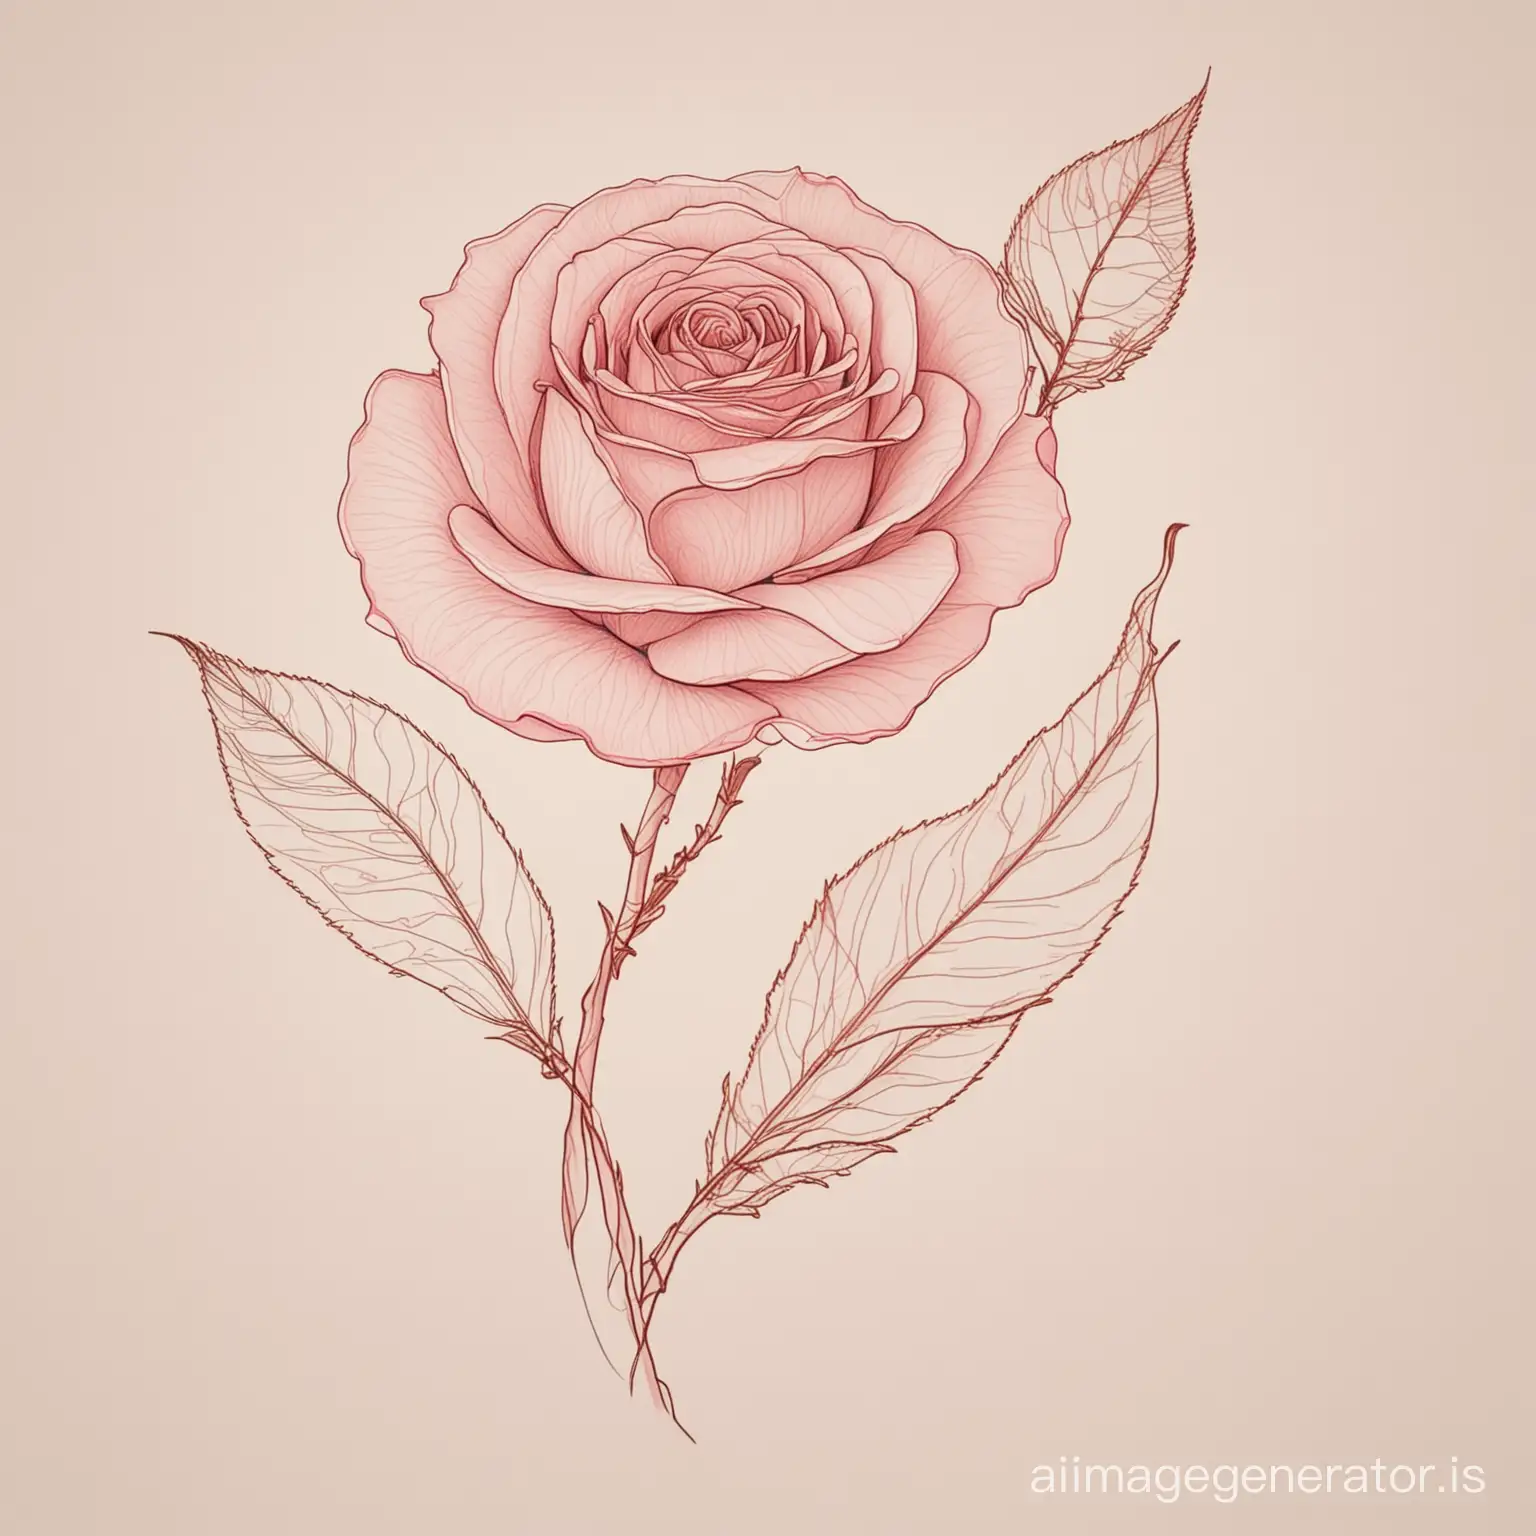 Aesthetic-Female-Body-with-Pink-Rose-Petals-Embracing-Imperfections-in-Golden-Ratio